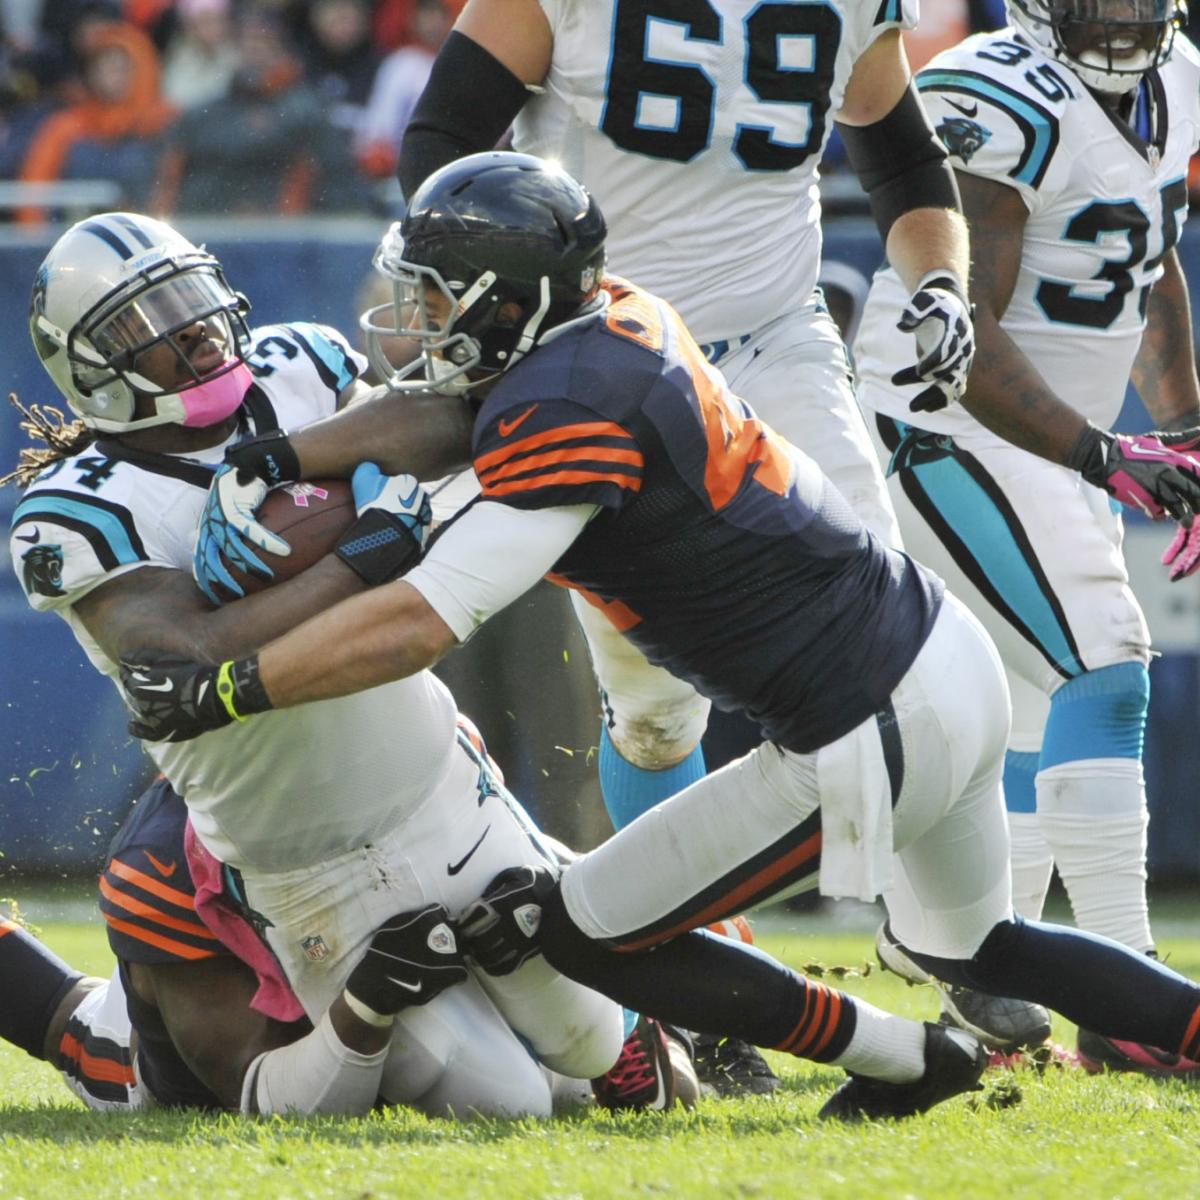 Panthers vs. Bears Full Highlights and Recap News, Scores